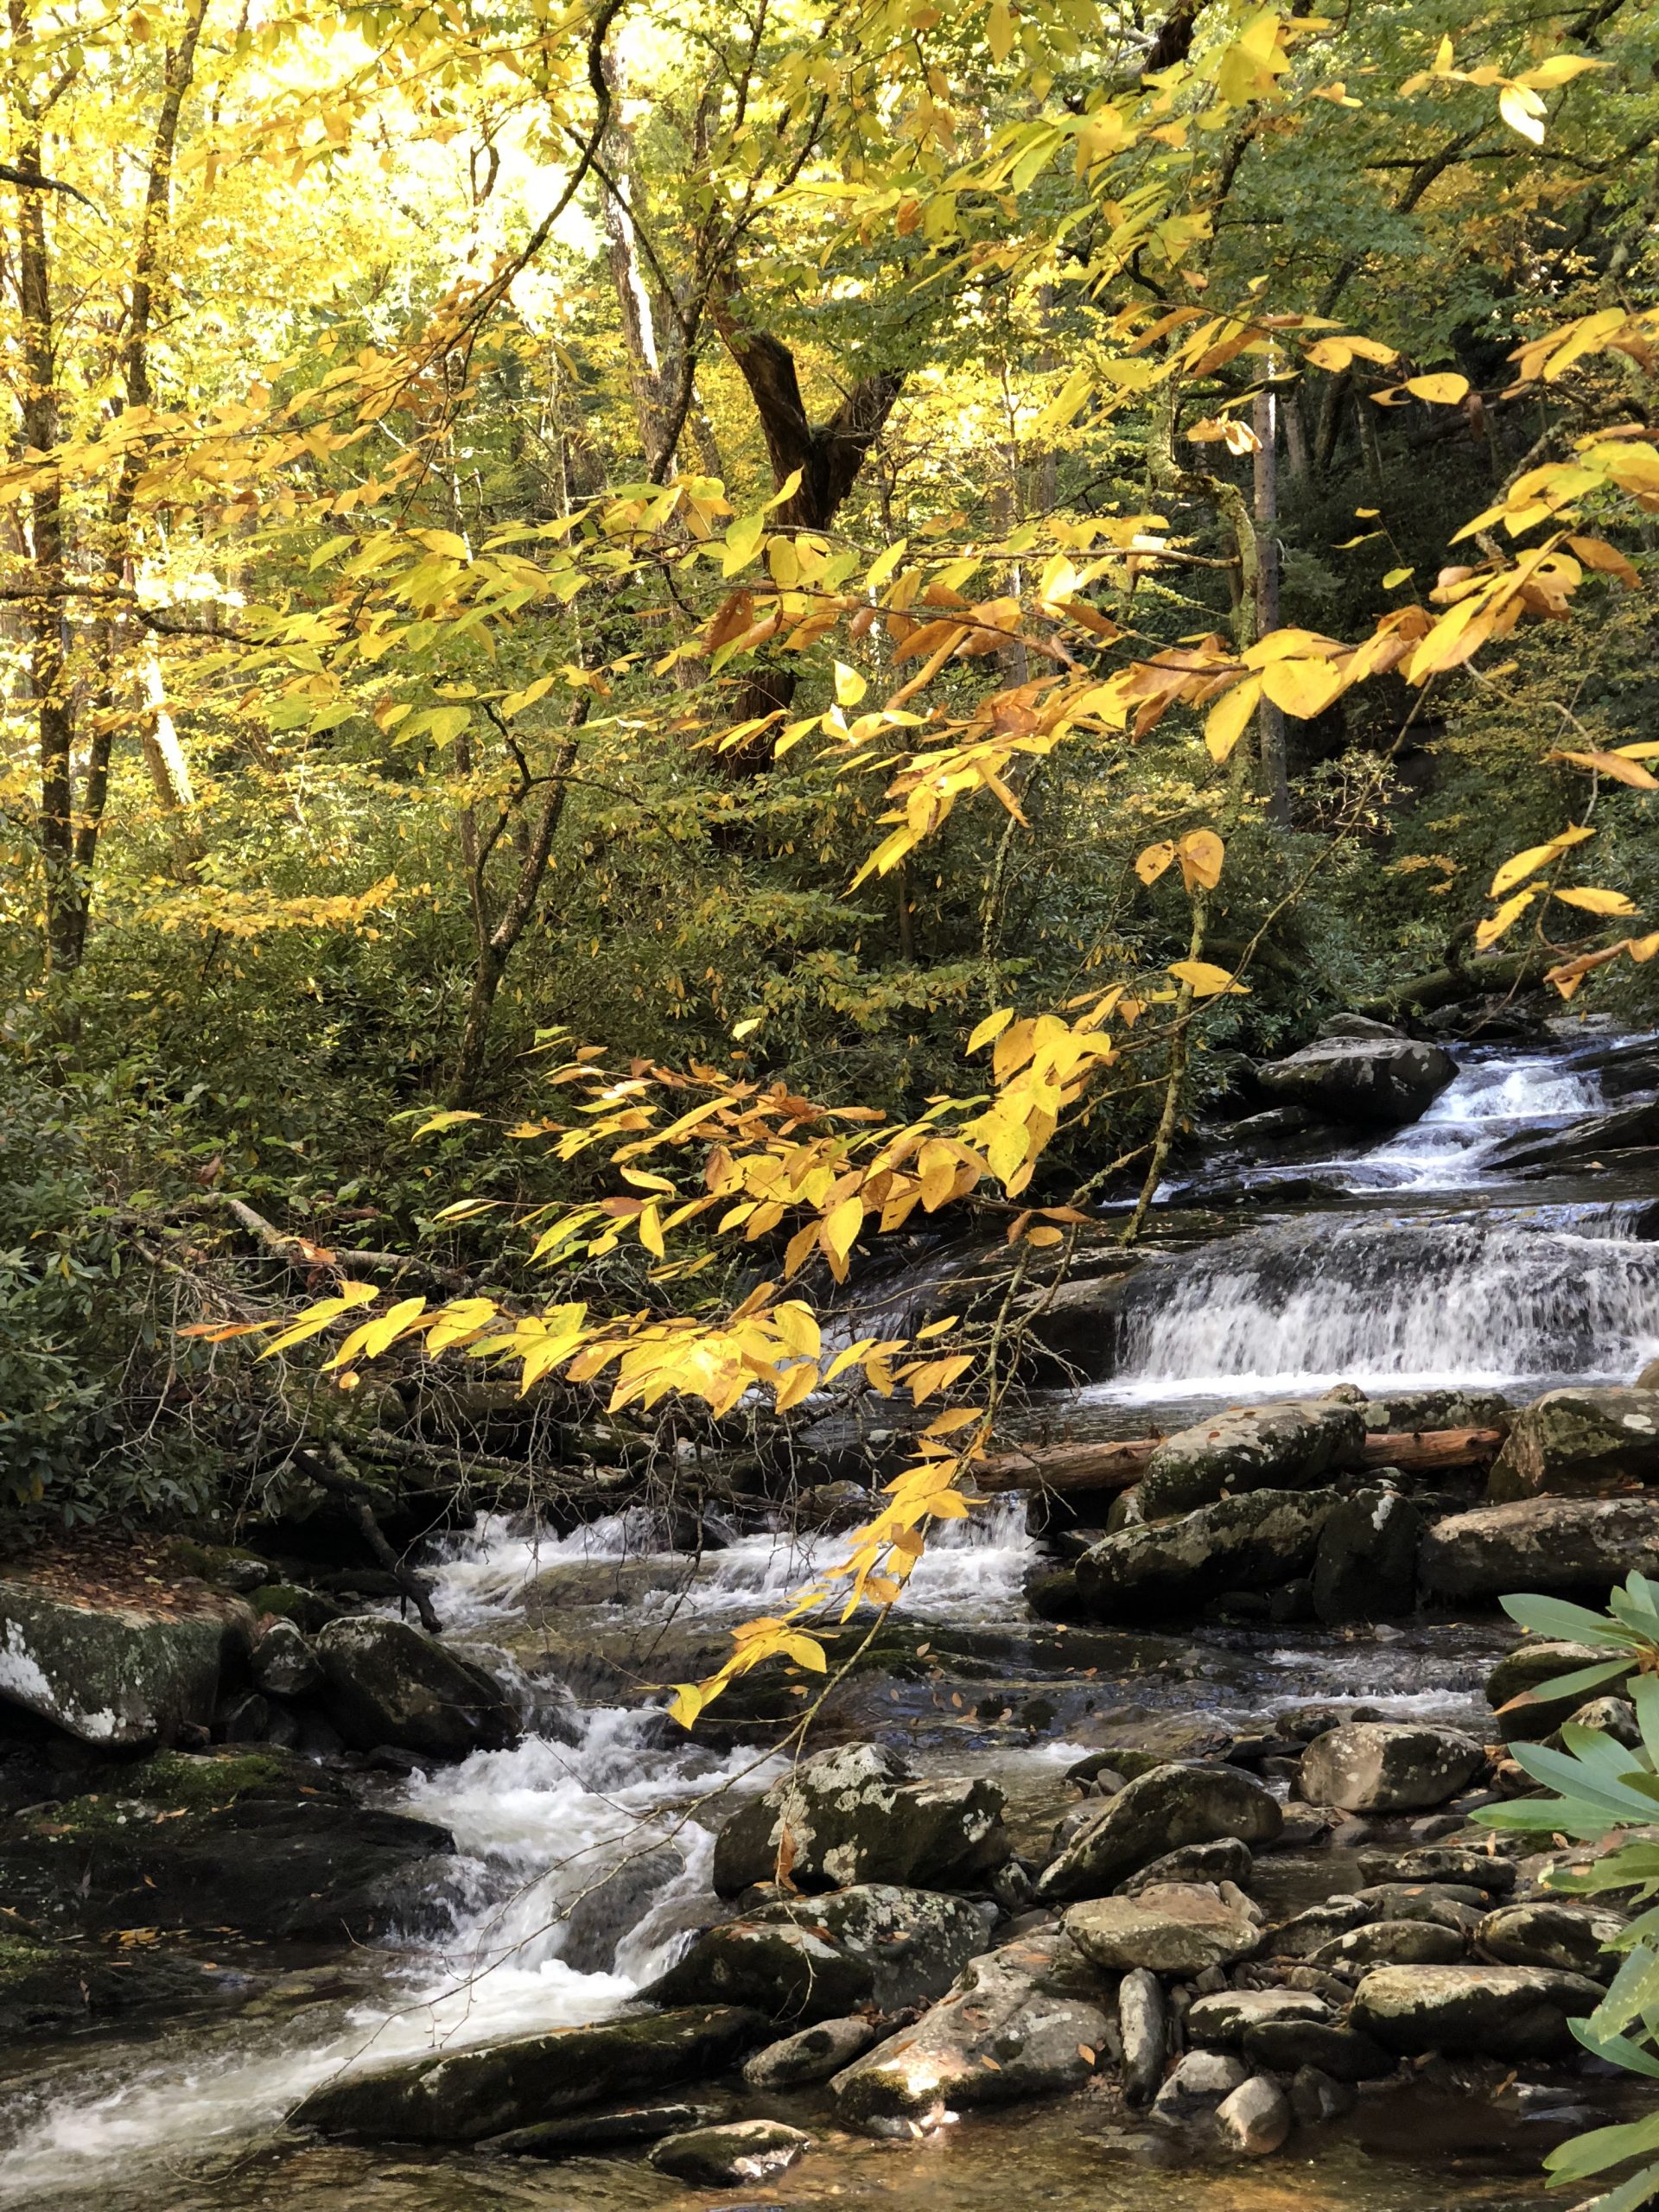 A Great Smoky Mountain National Park Leaf Peeping Trip